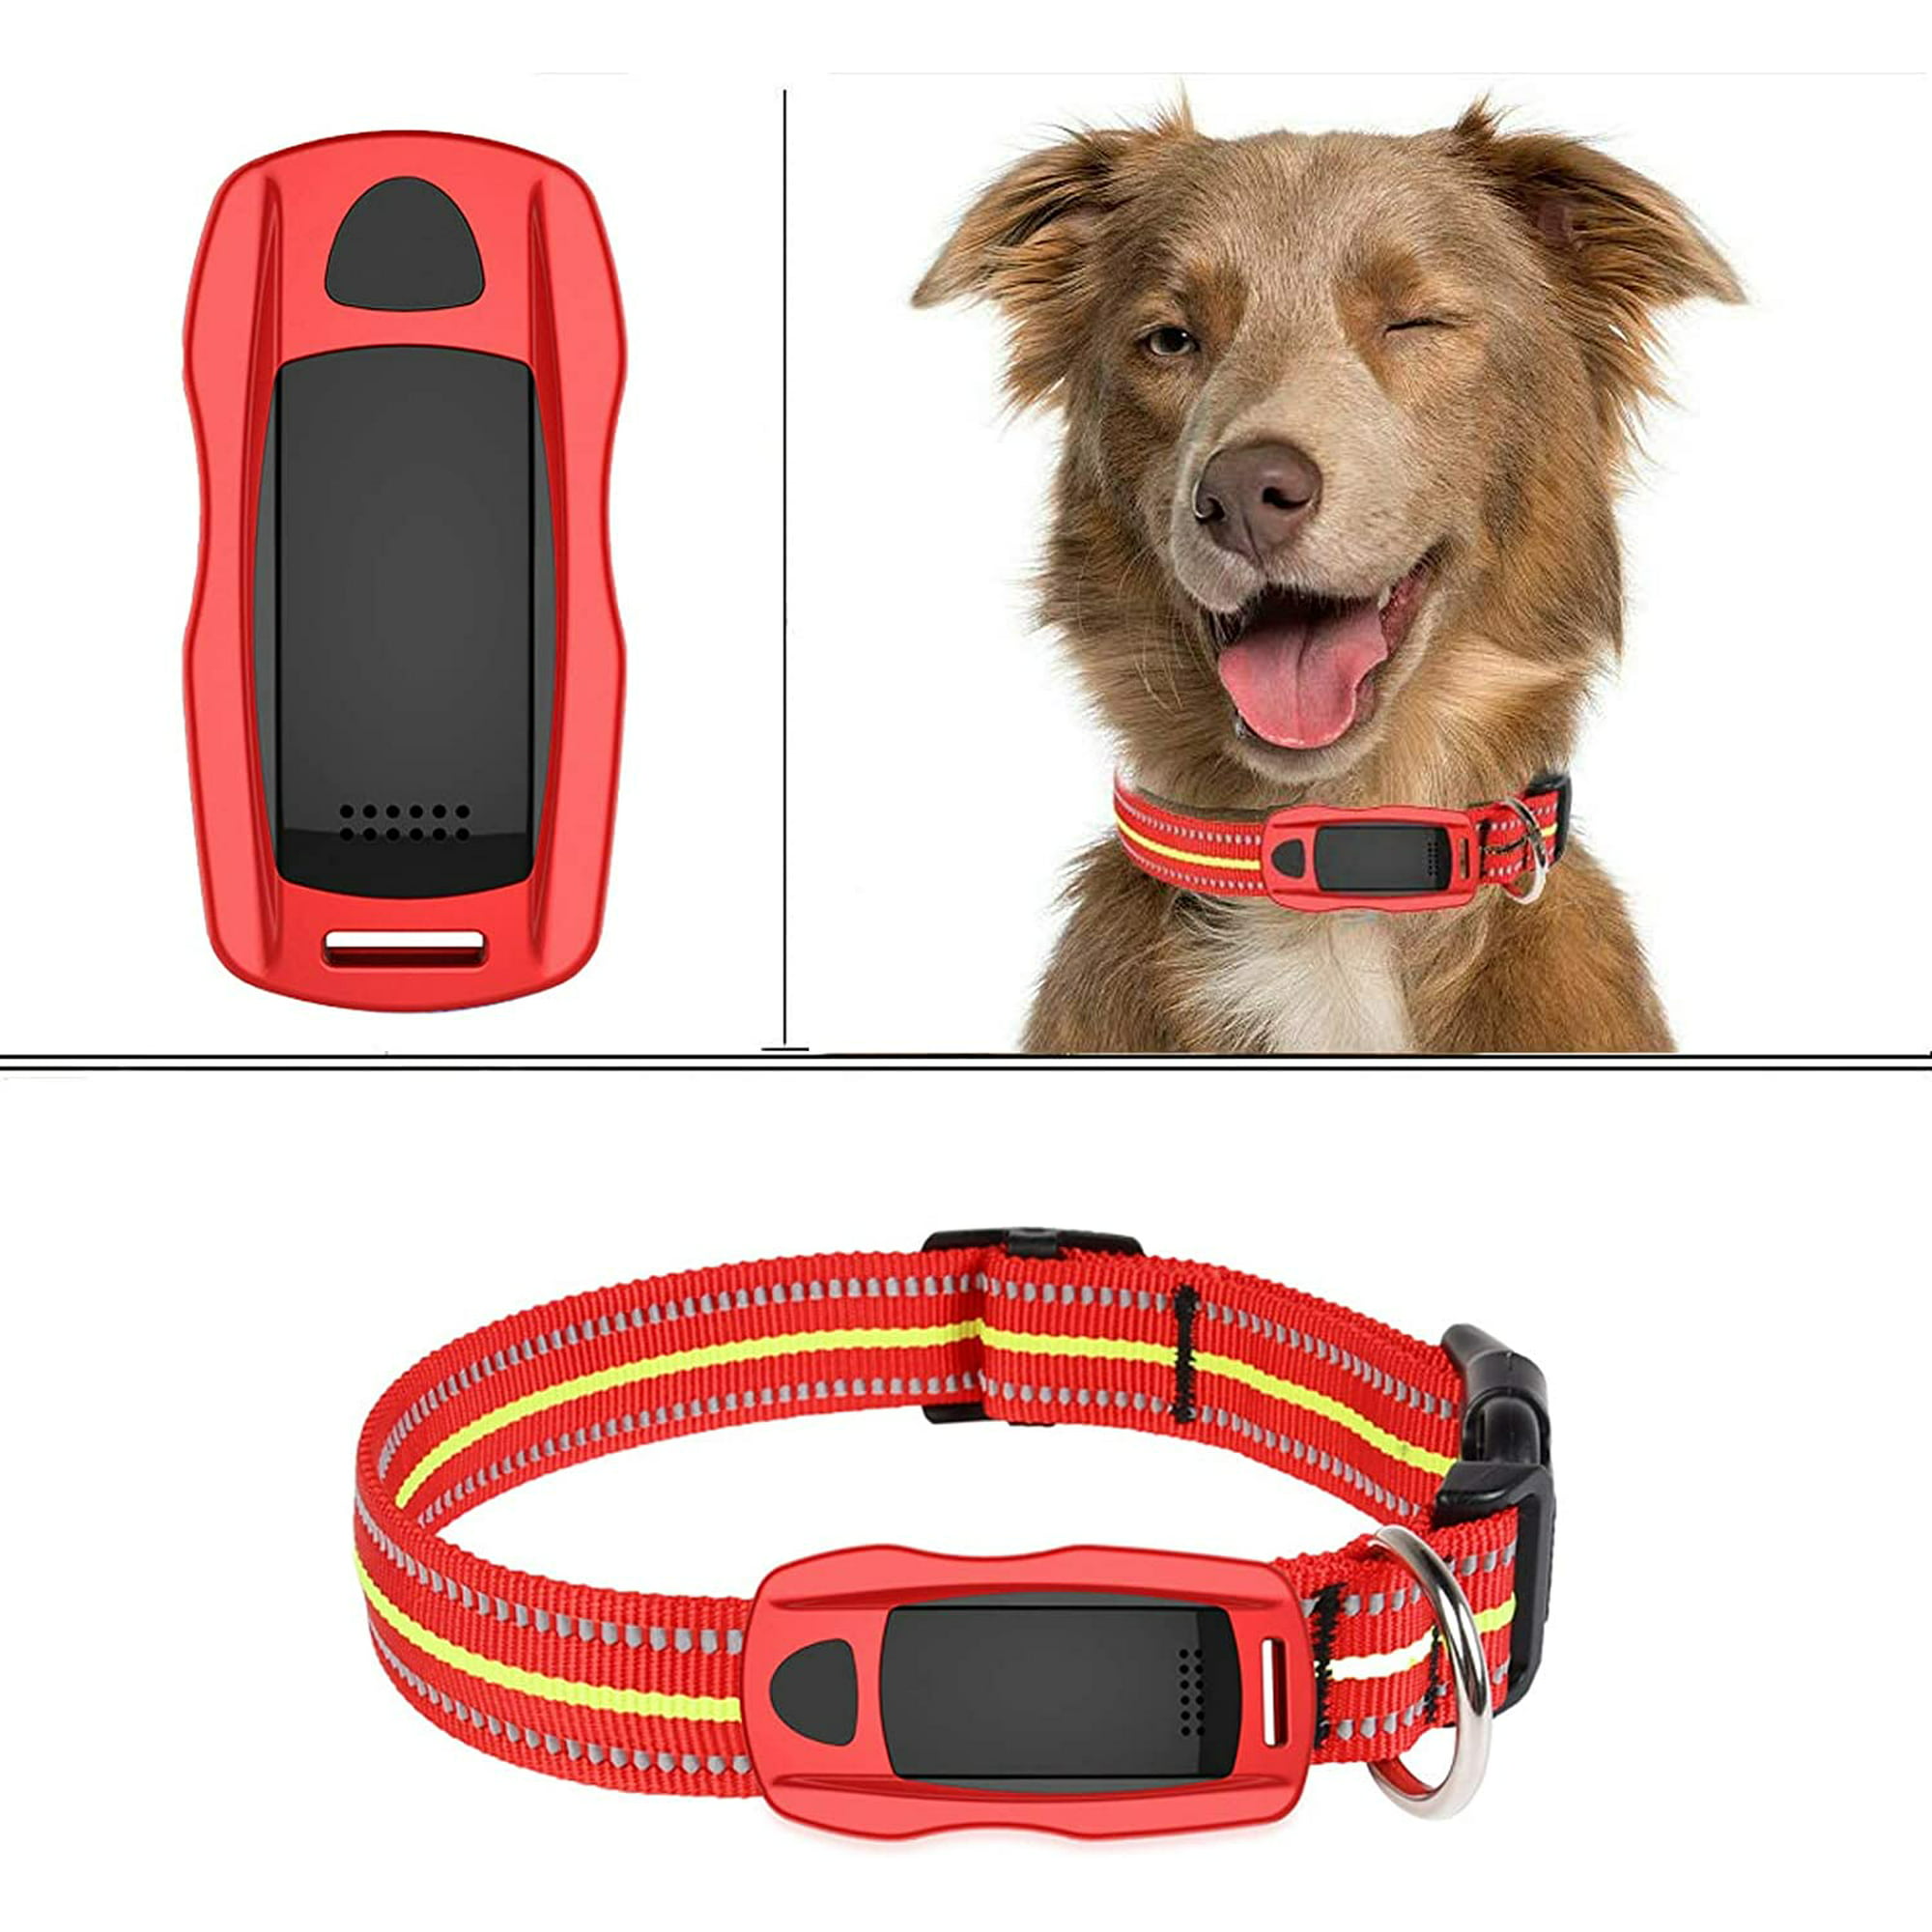 Dyfrio Pet GPS Tracker Dog GPS Tracker and Pet Finder Waterproof Activity  Monitor Tracking Device for Dogs, Cats, Pets,Kids,Elders | Walmart Canada